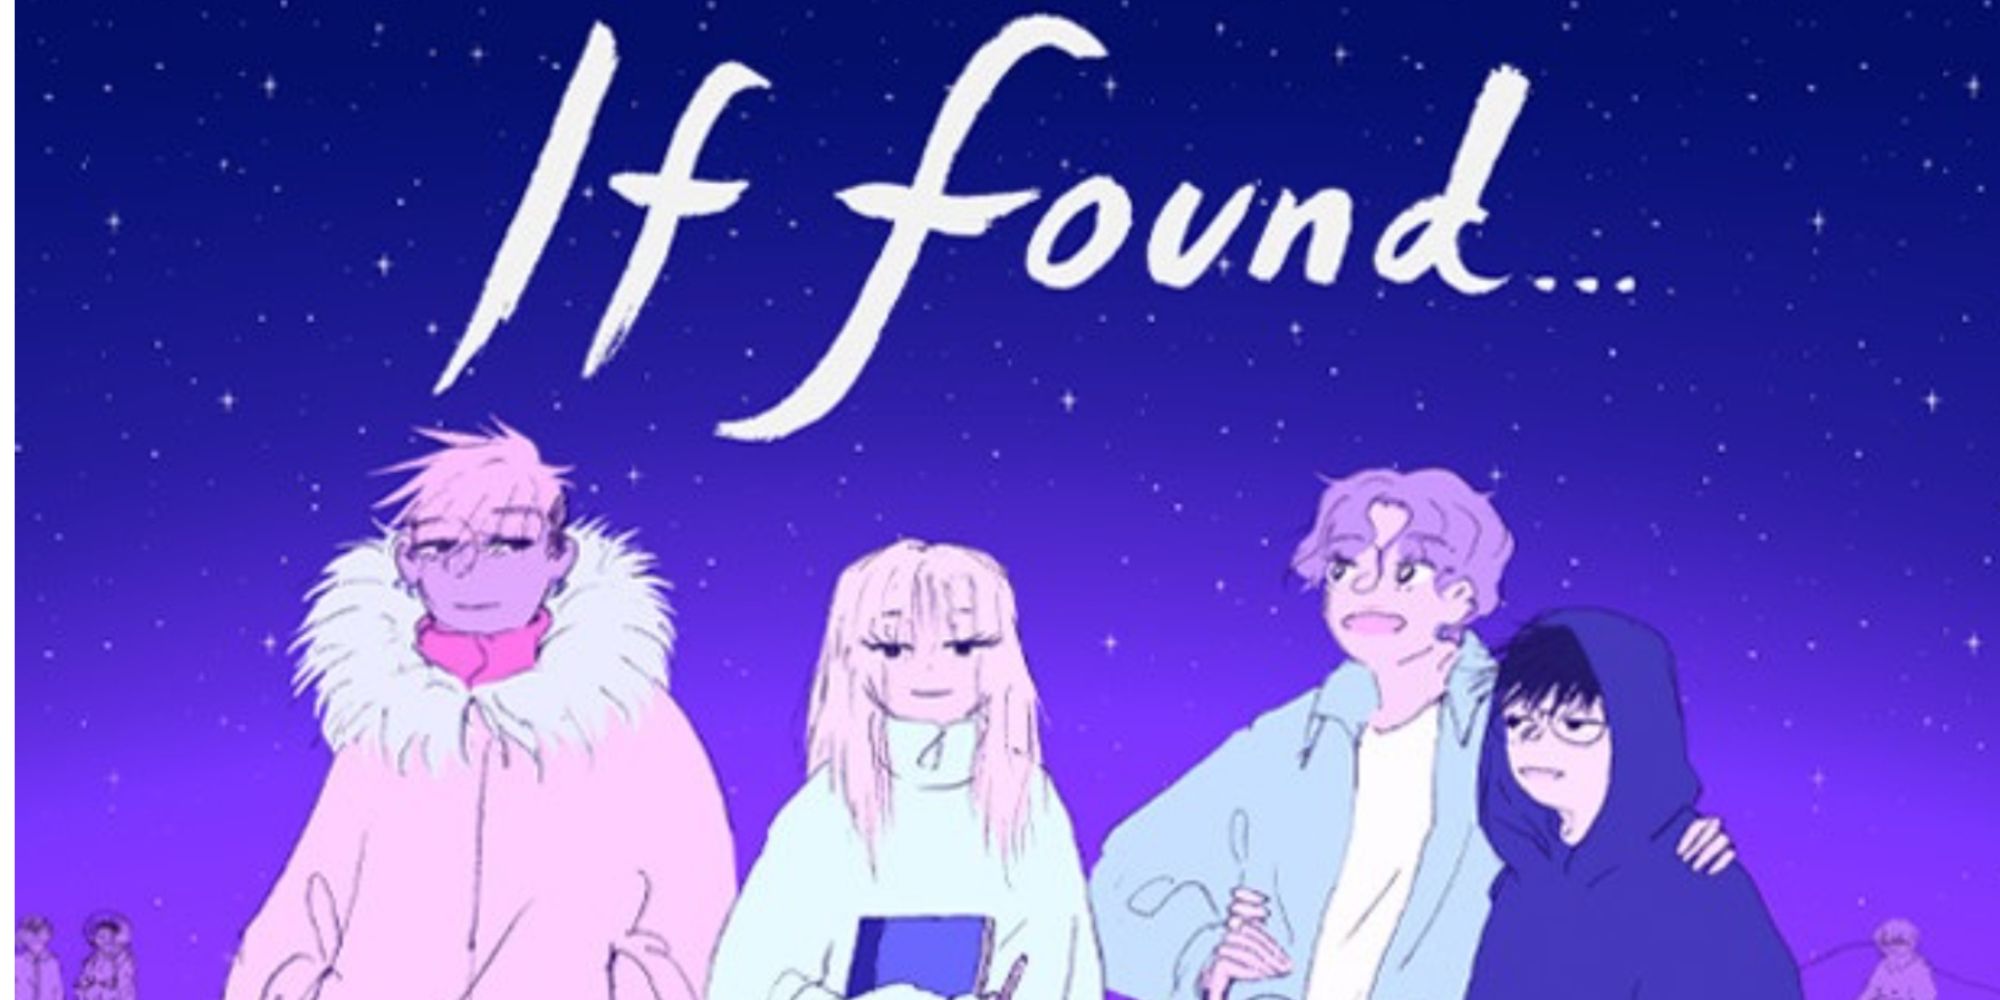 Promotional art for If Found... featuring the main characters